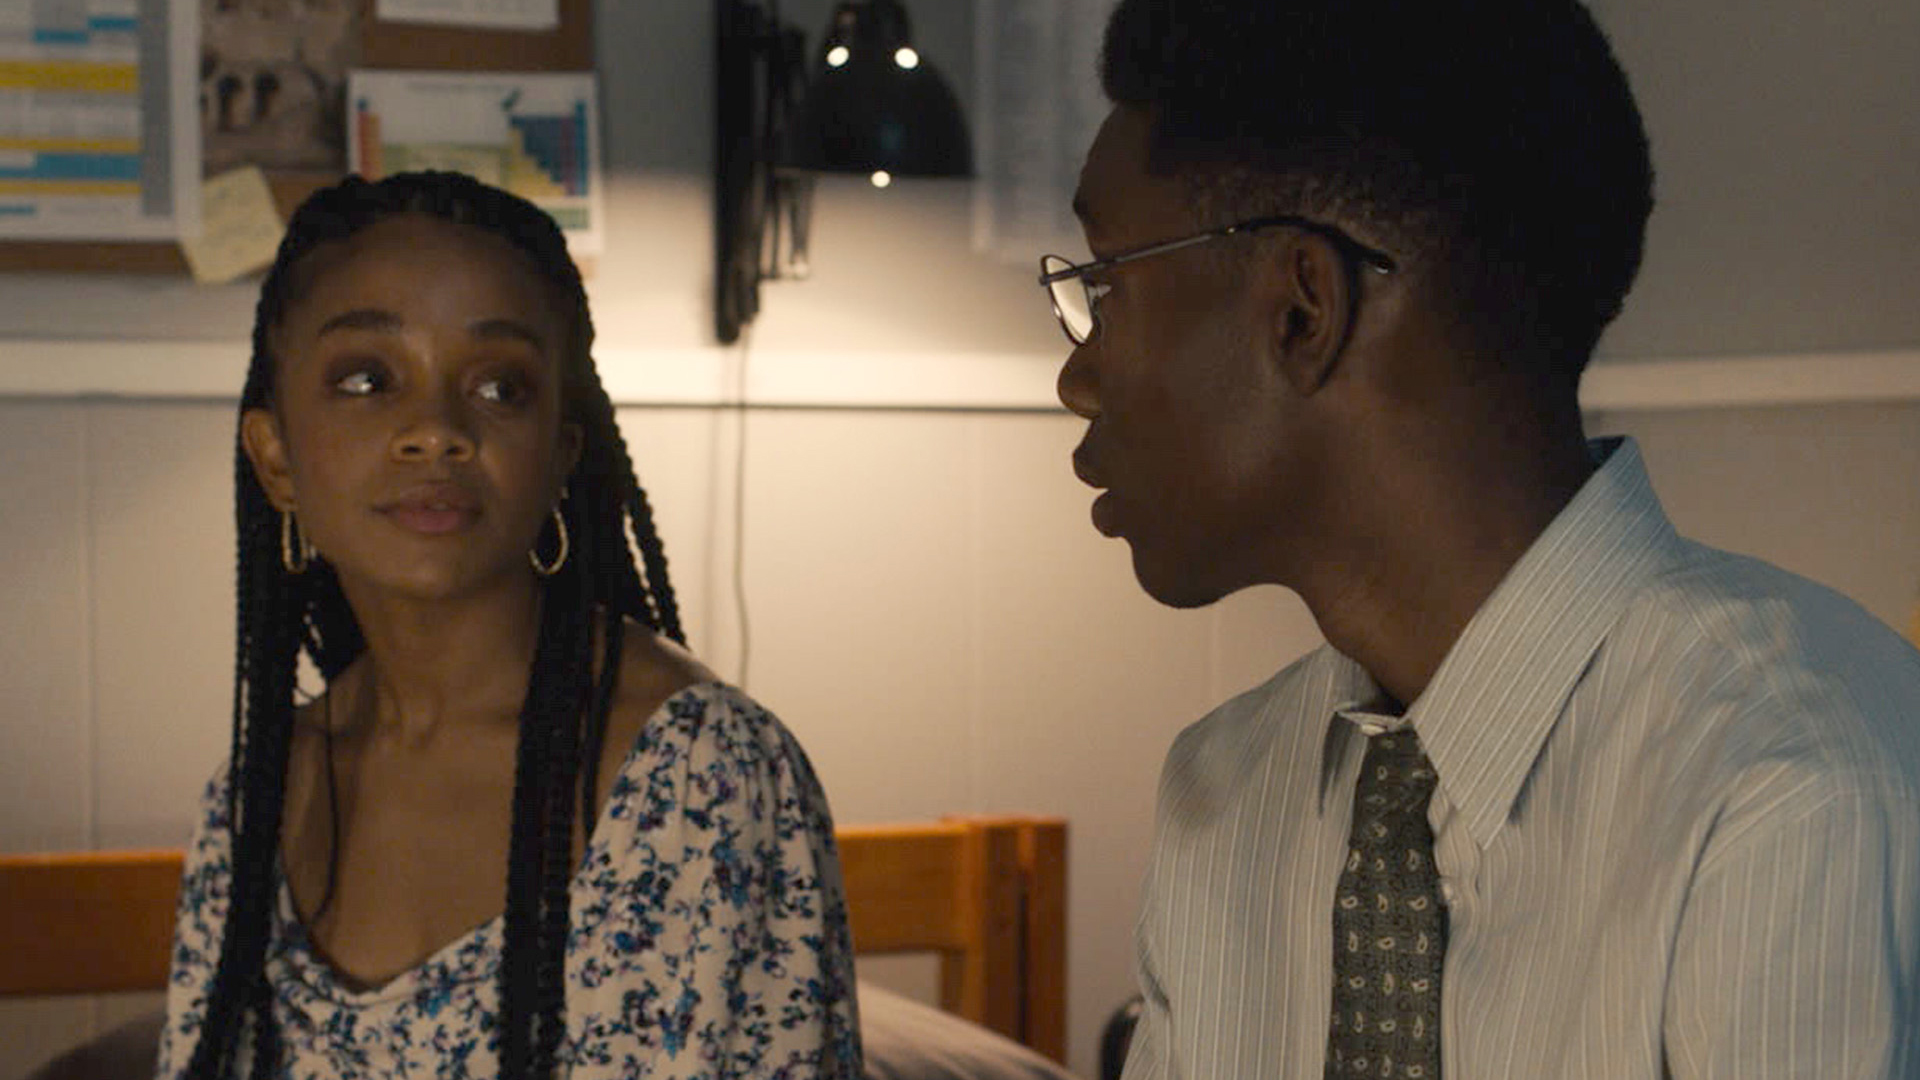 Rachel Hilson as young Beth and Niles Fitch as young Randall talking in their university dorm room in ‘This Is Us’ Season 5 Episode 14